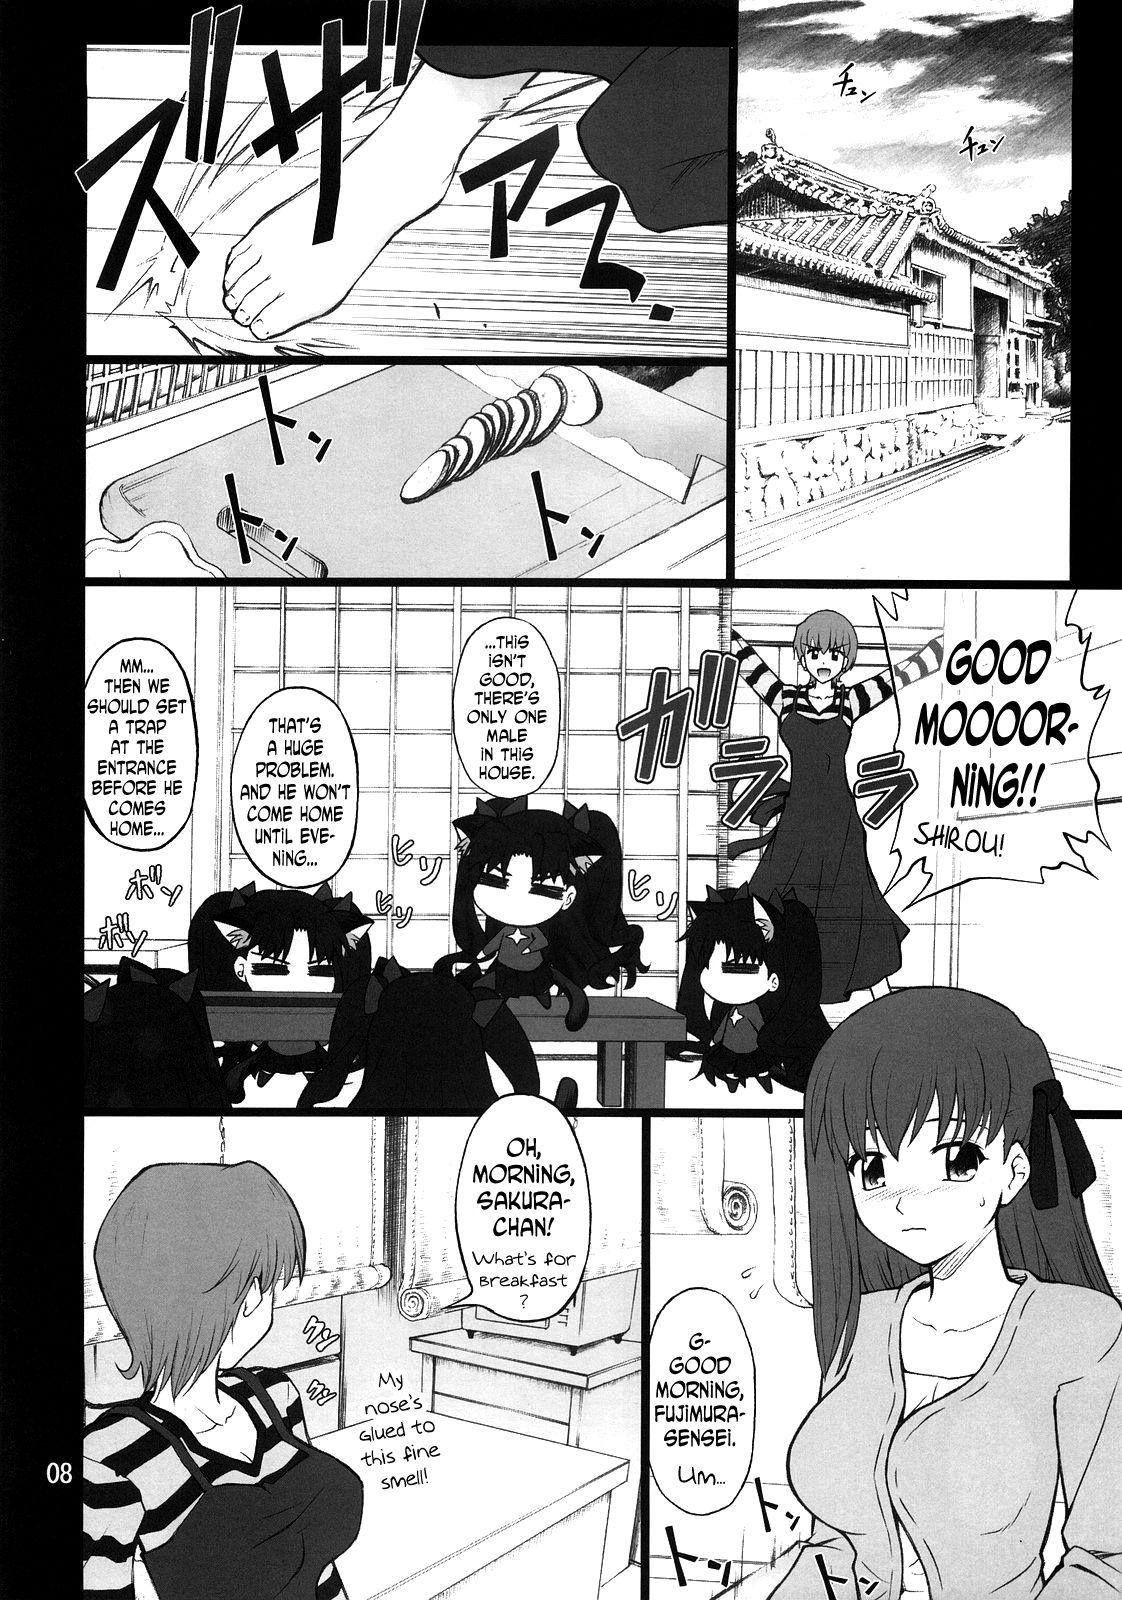 Young Tits Grem-Rin 2 - Fate stay night Big Dicks - Page 7